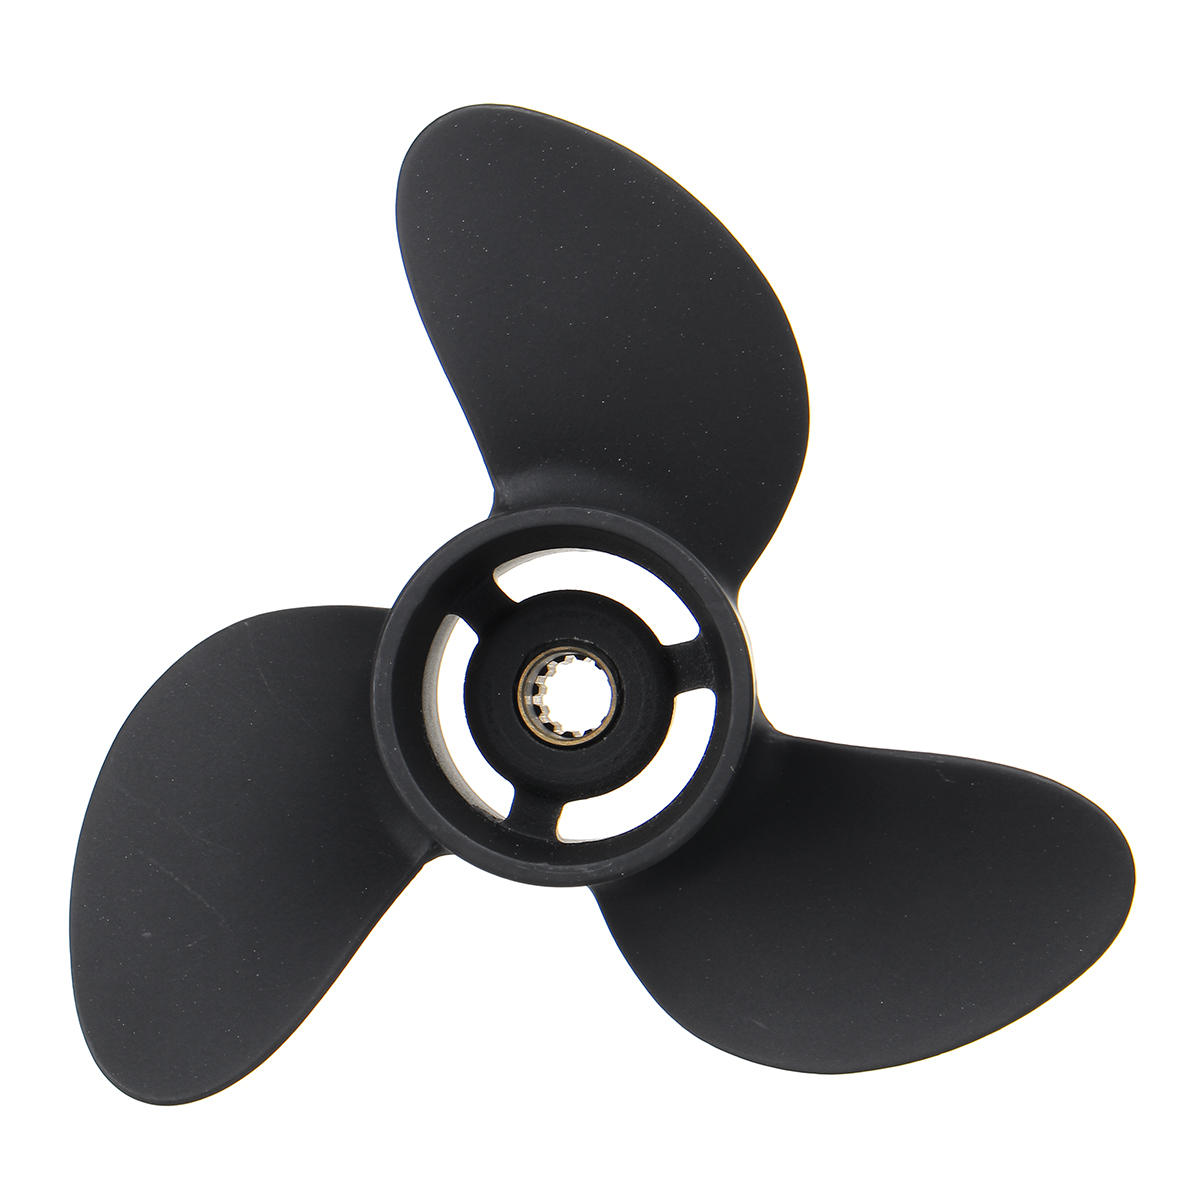 7.8 x 9 Aluminum Outboard Propeller For Tohatsu Nissan Mercury 4HP 5HP 6HP 369B645181 48-812951A02